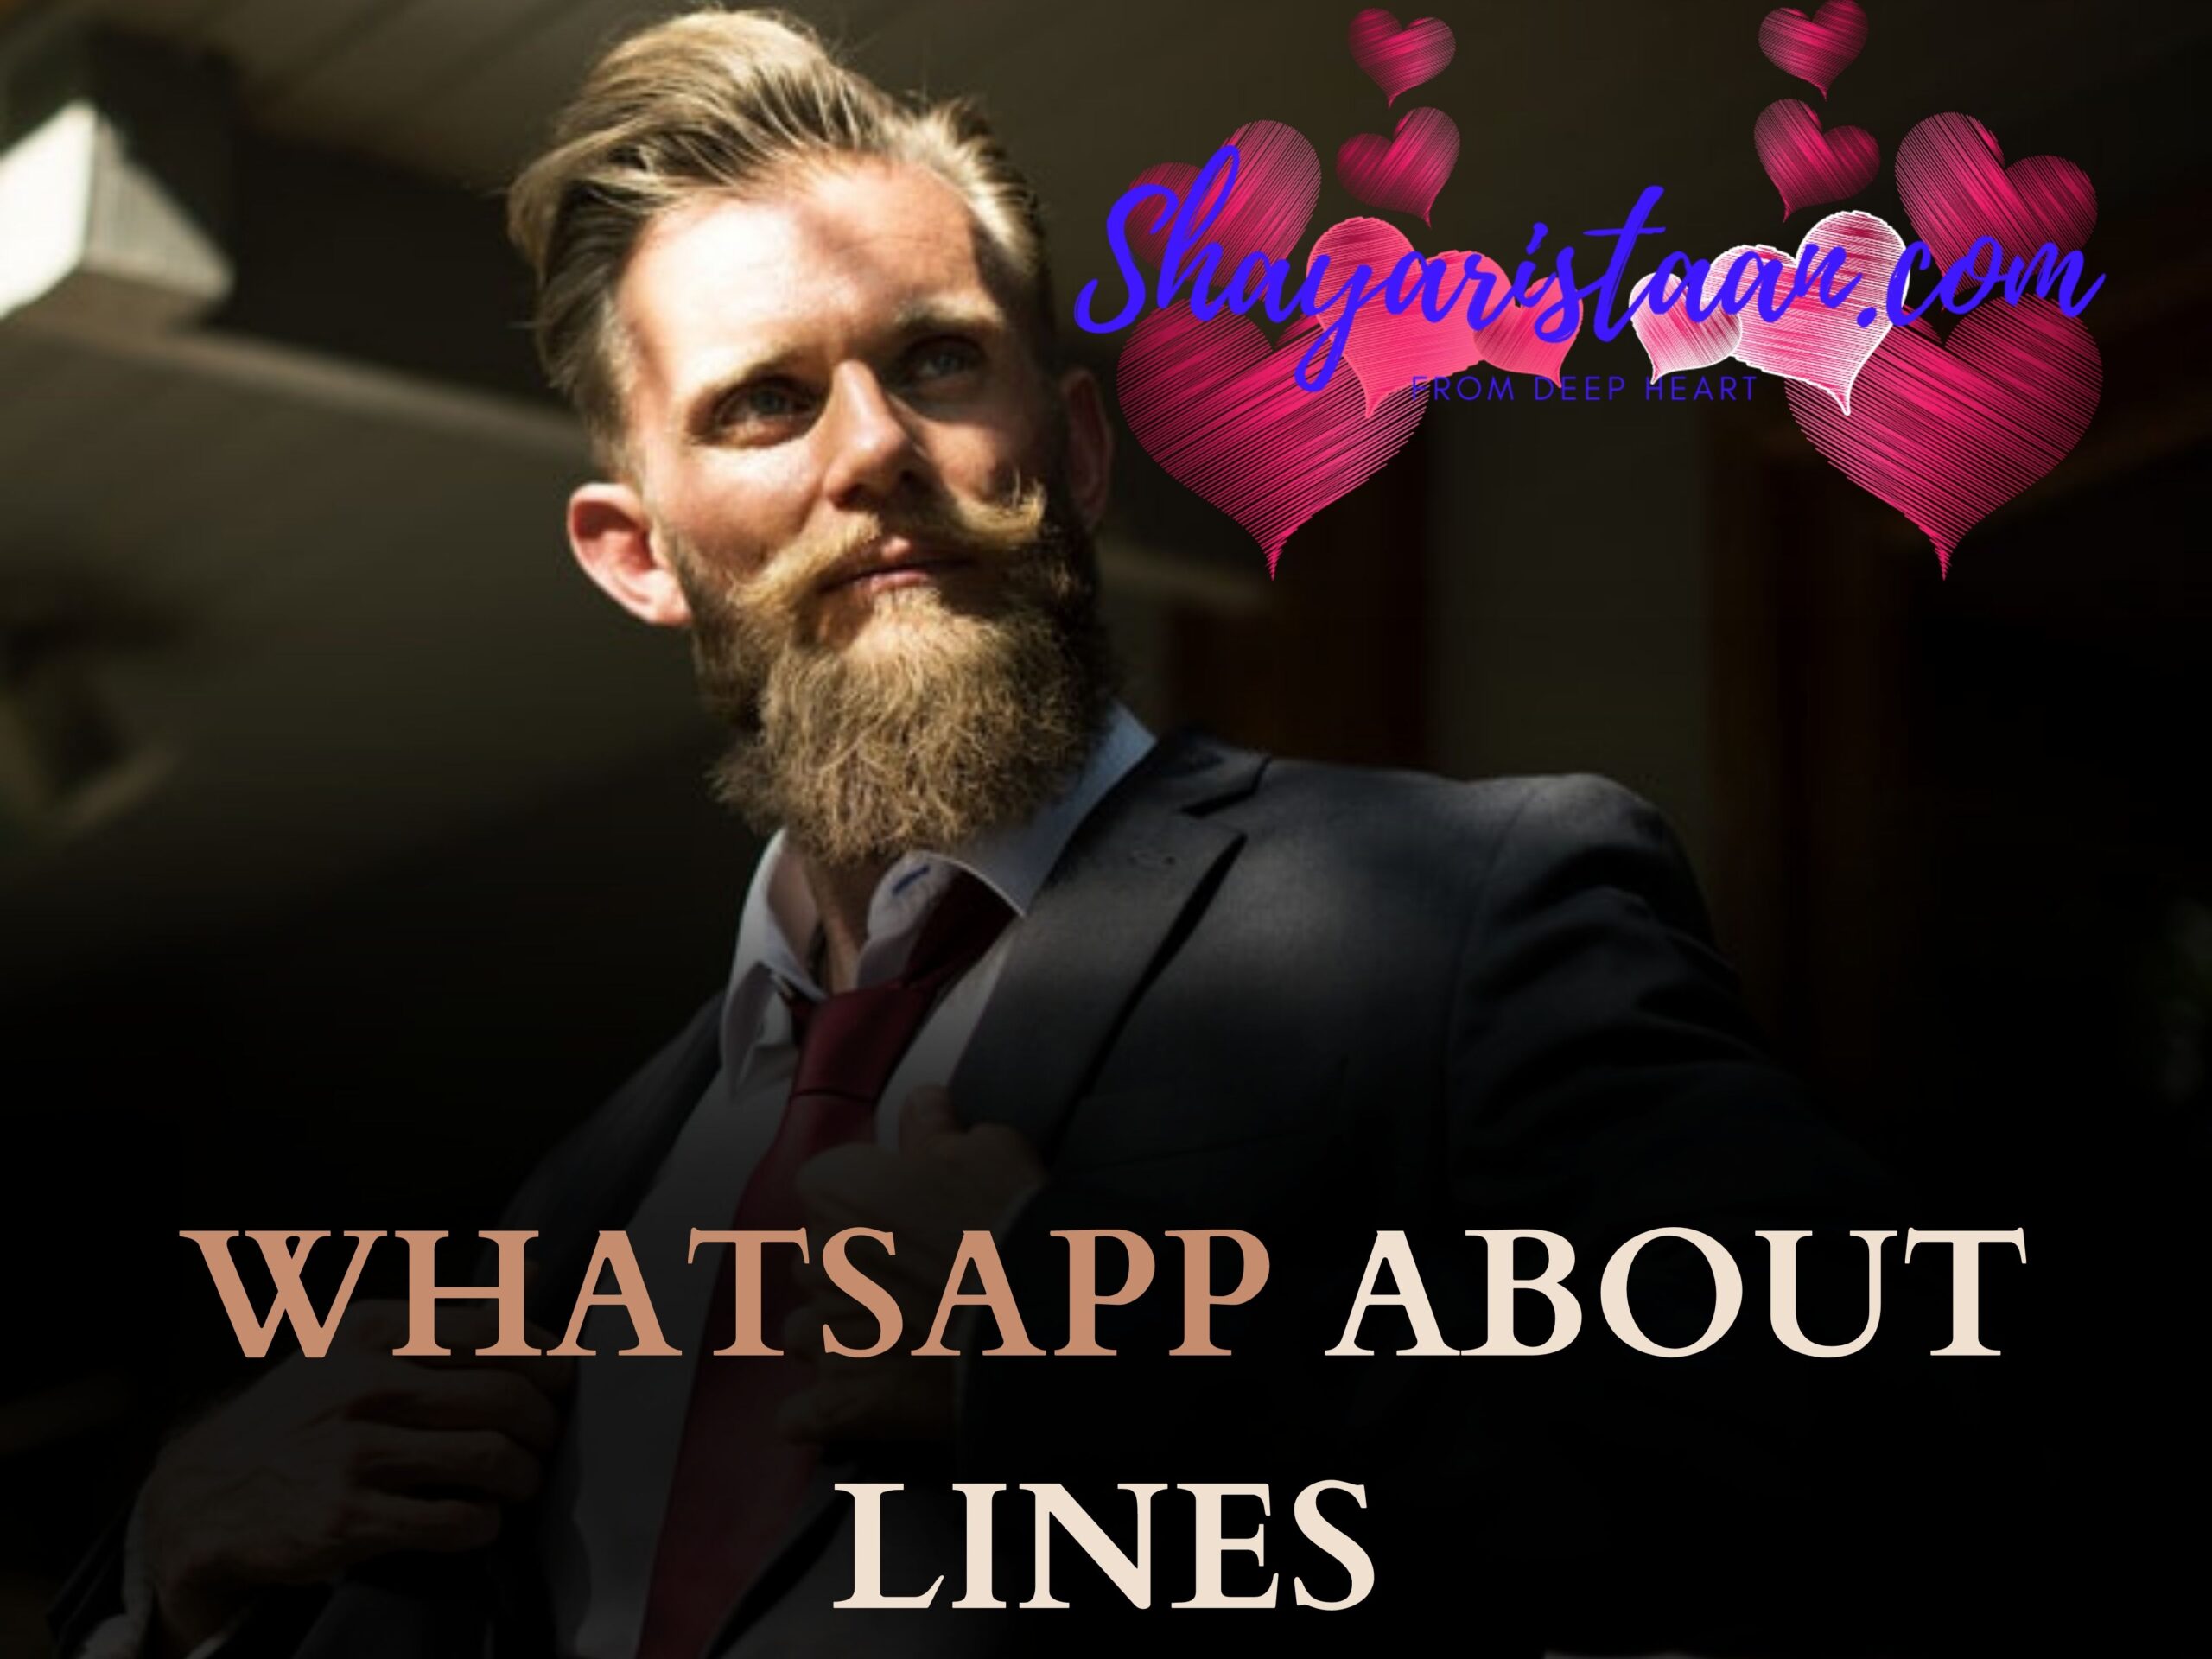 whatsapp about lines